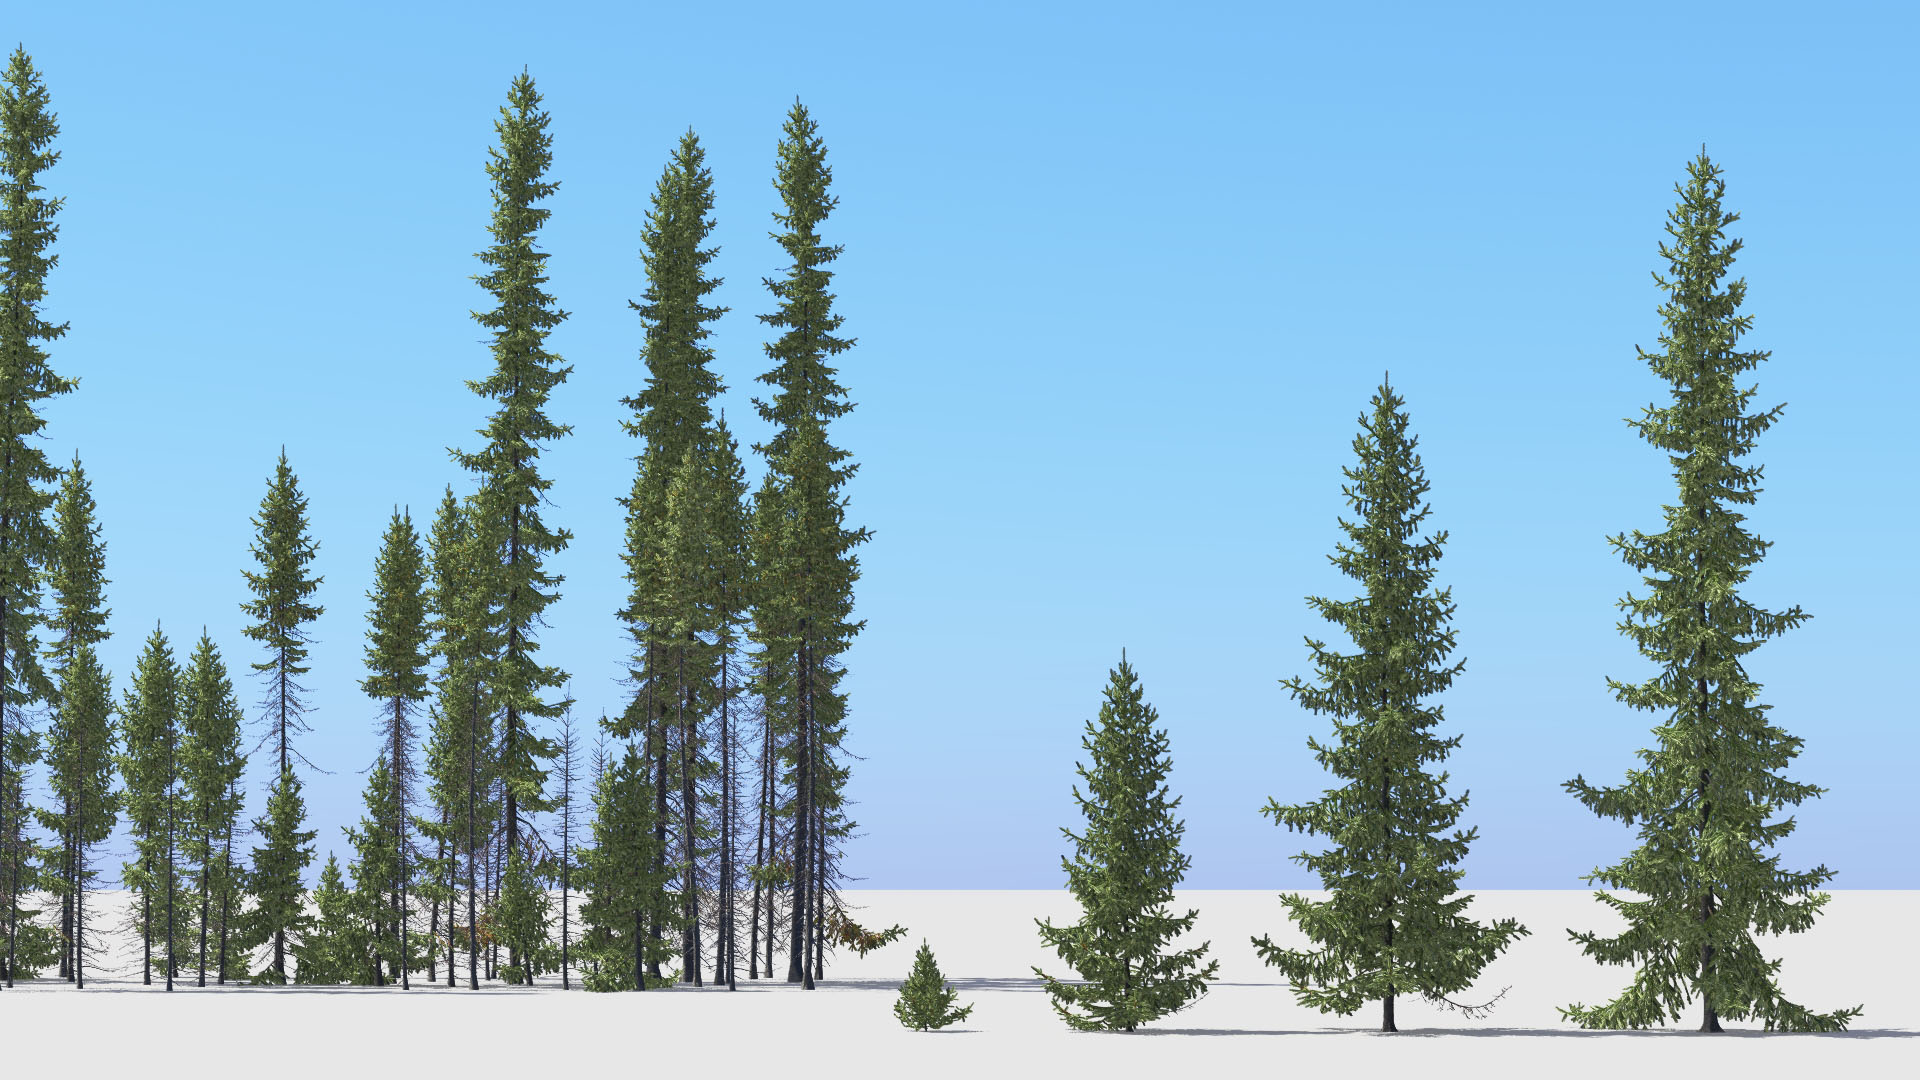 3D model of the Black spruce Picea mariana